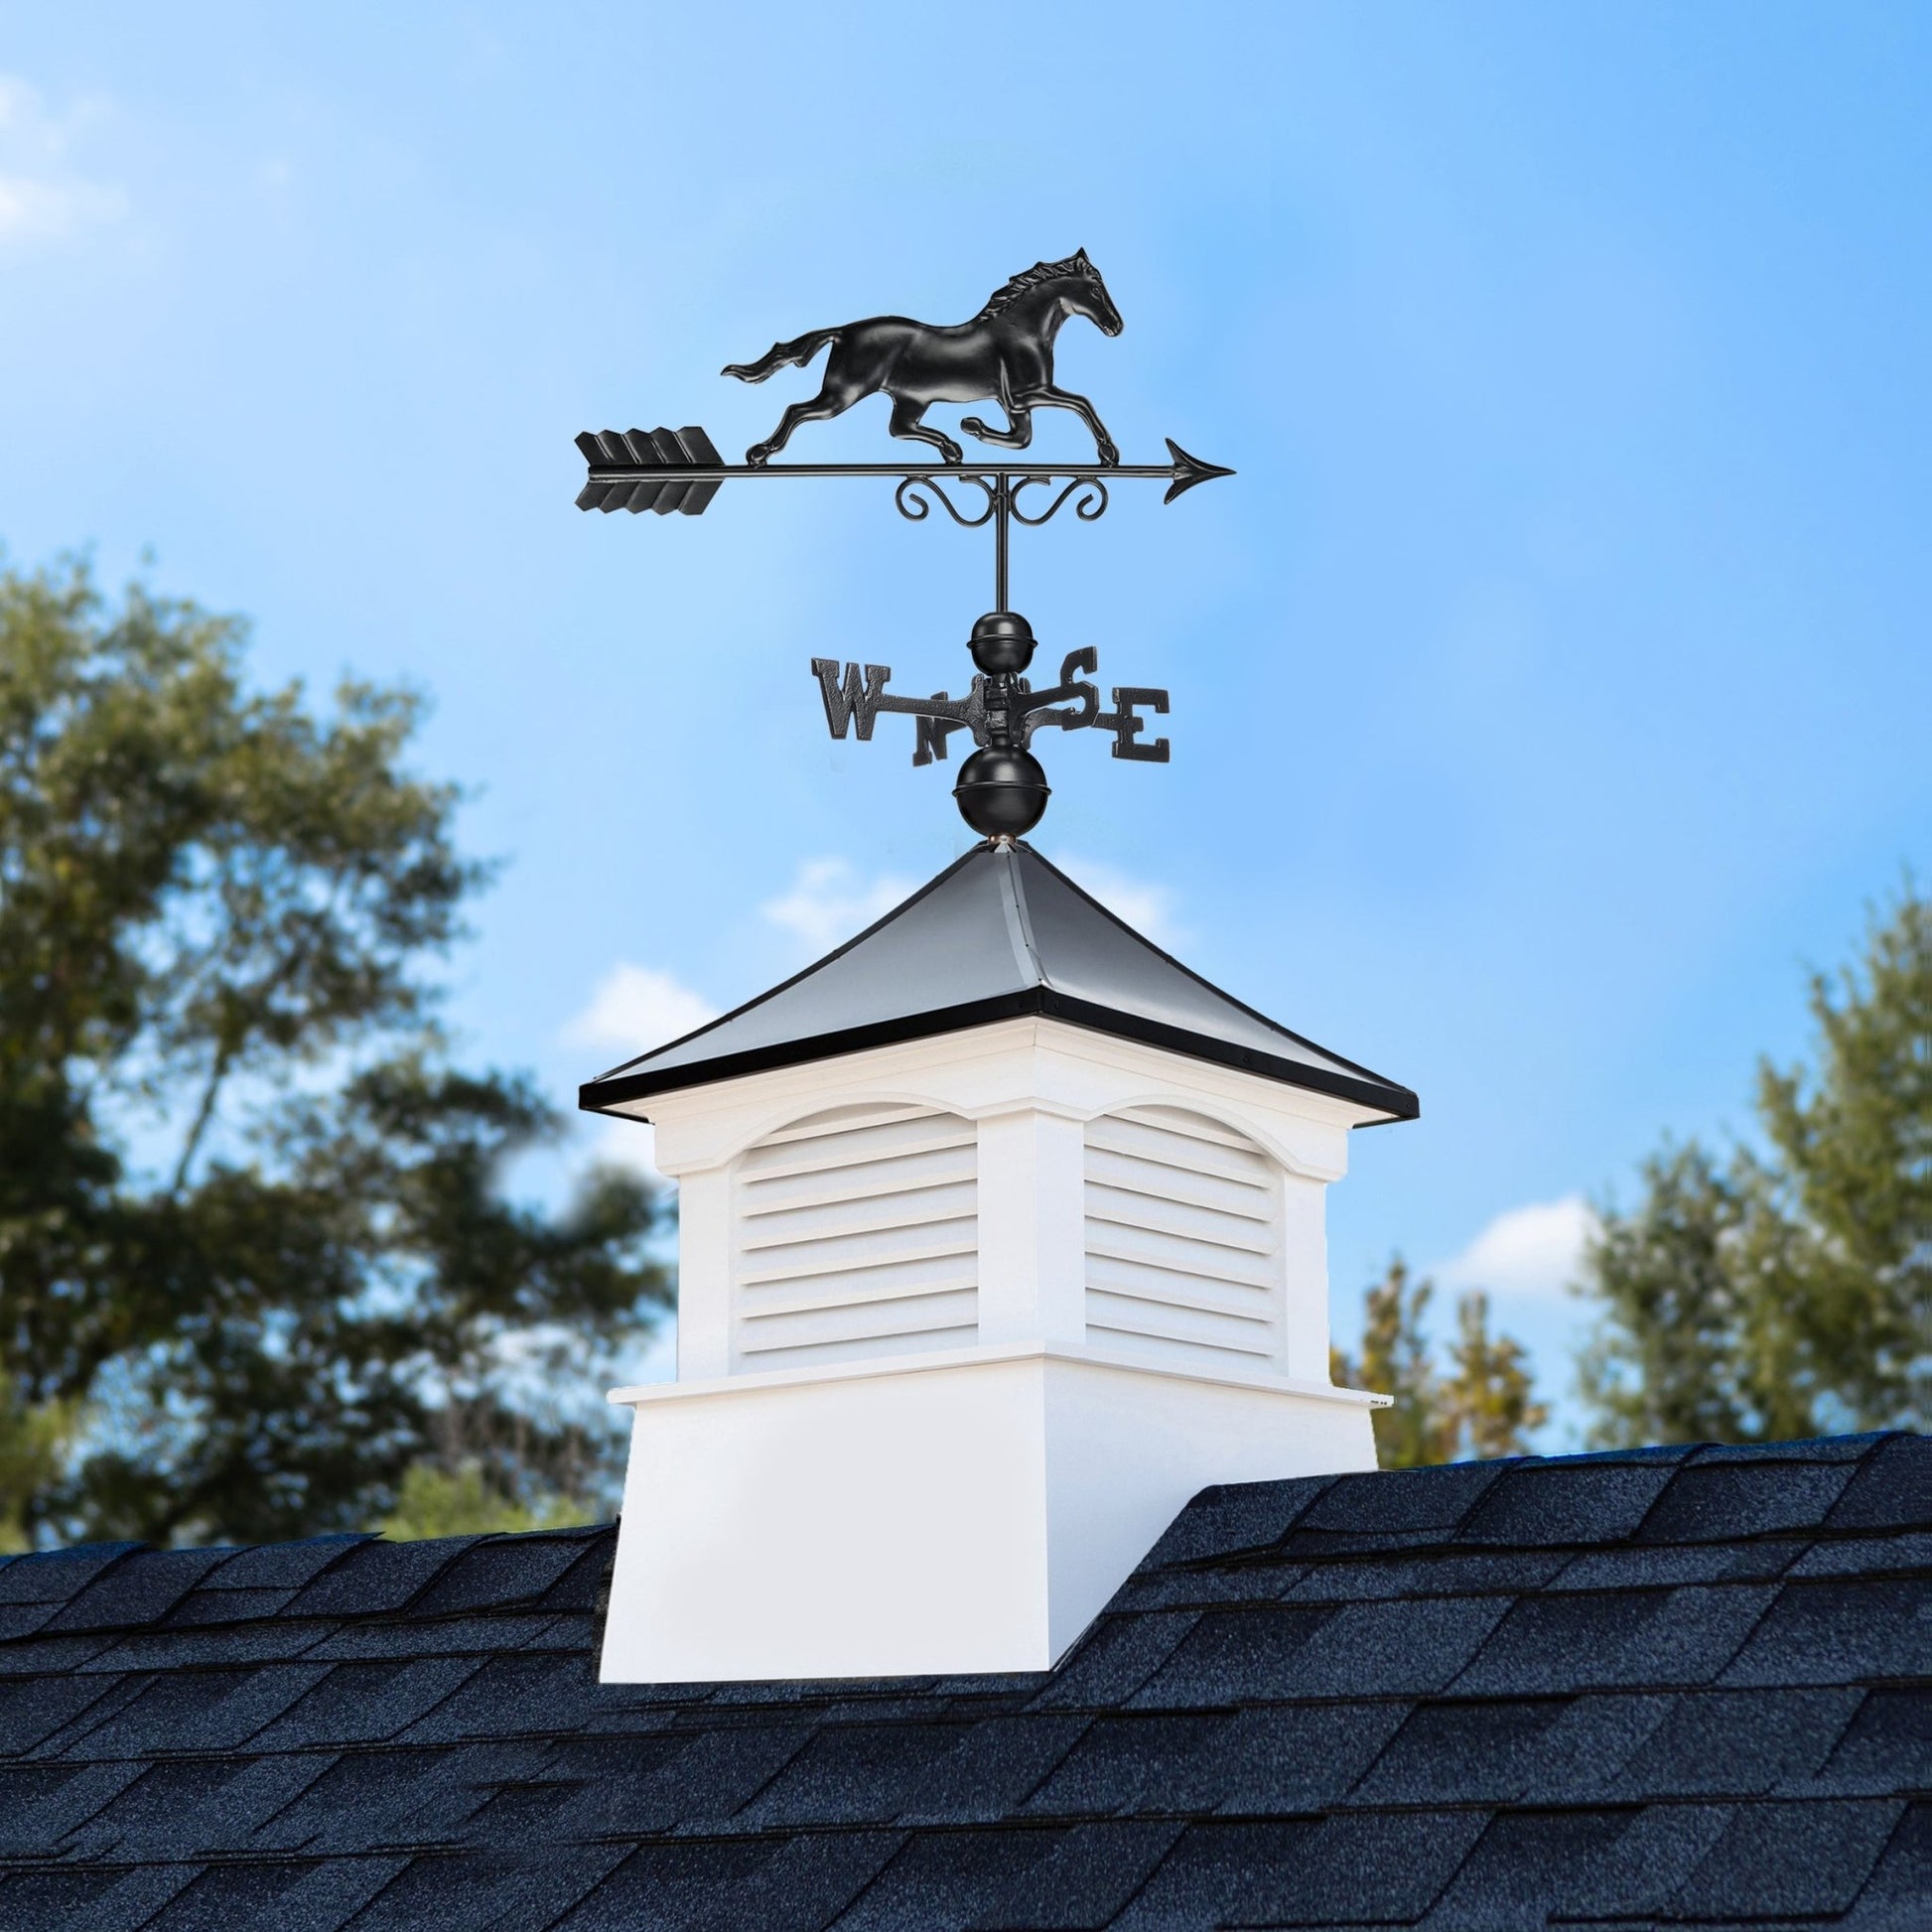 26" Square Coventry Vinyl Cupola with Black Aluminum roof and Black Aluminum Horse Weathervane - Good Directions